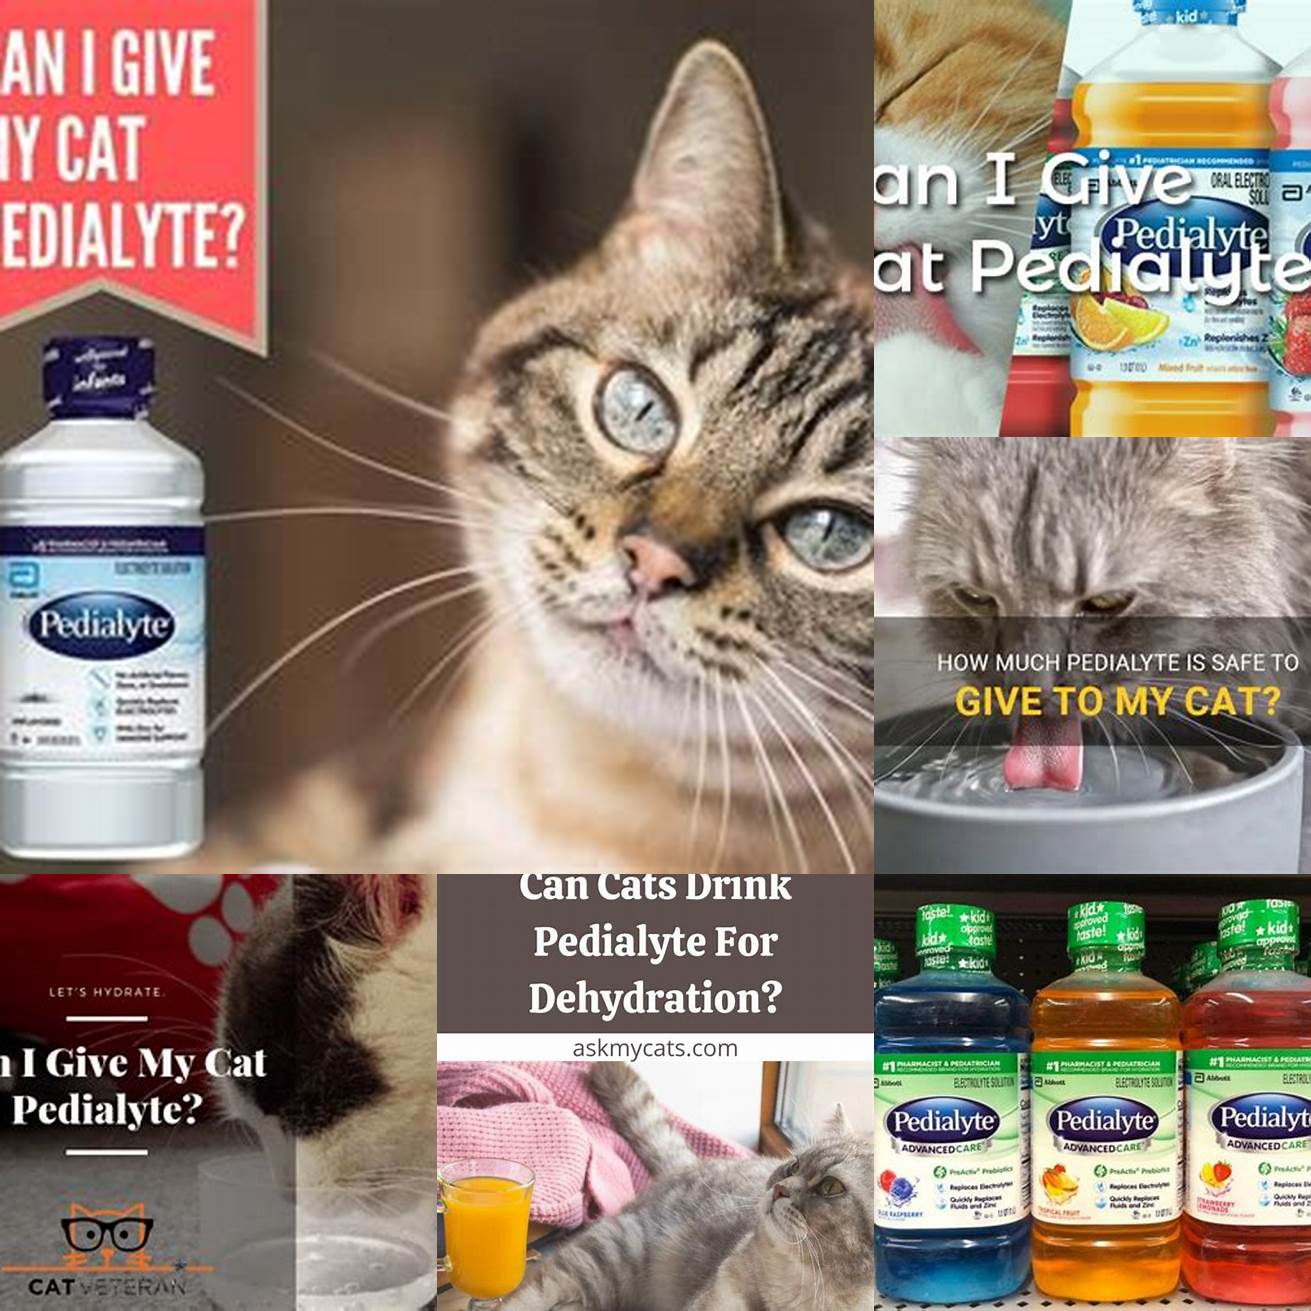 Q Can I give my cat Pedialyte without consulting a vet